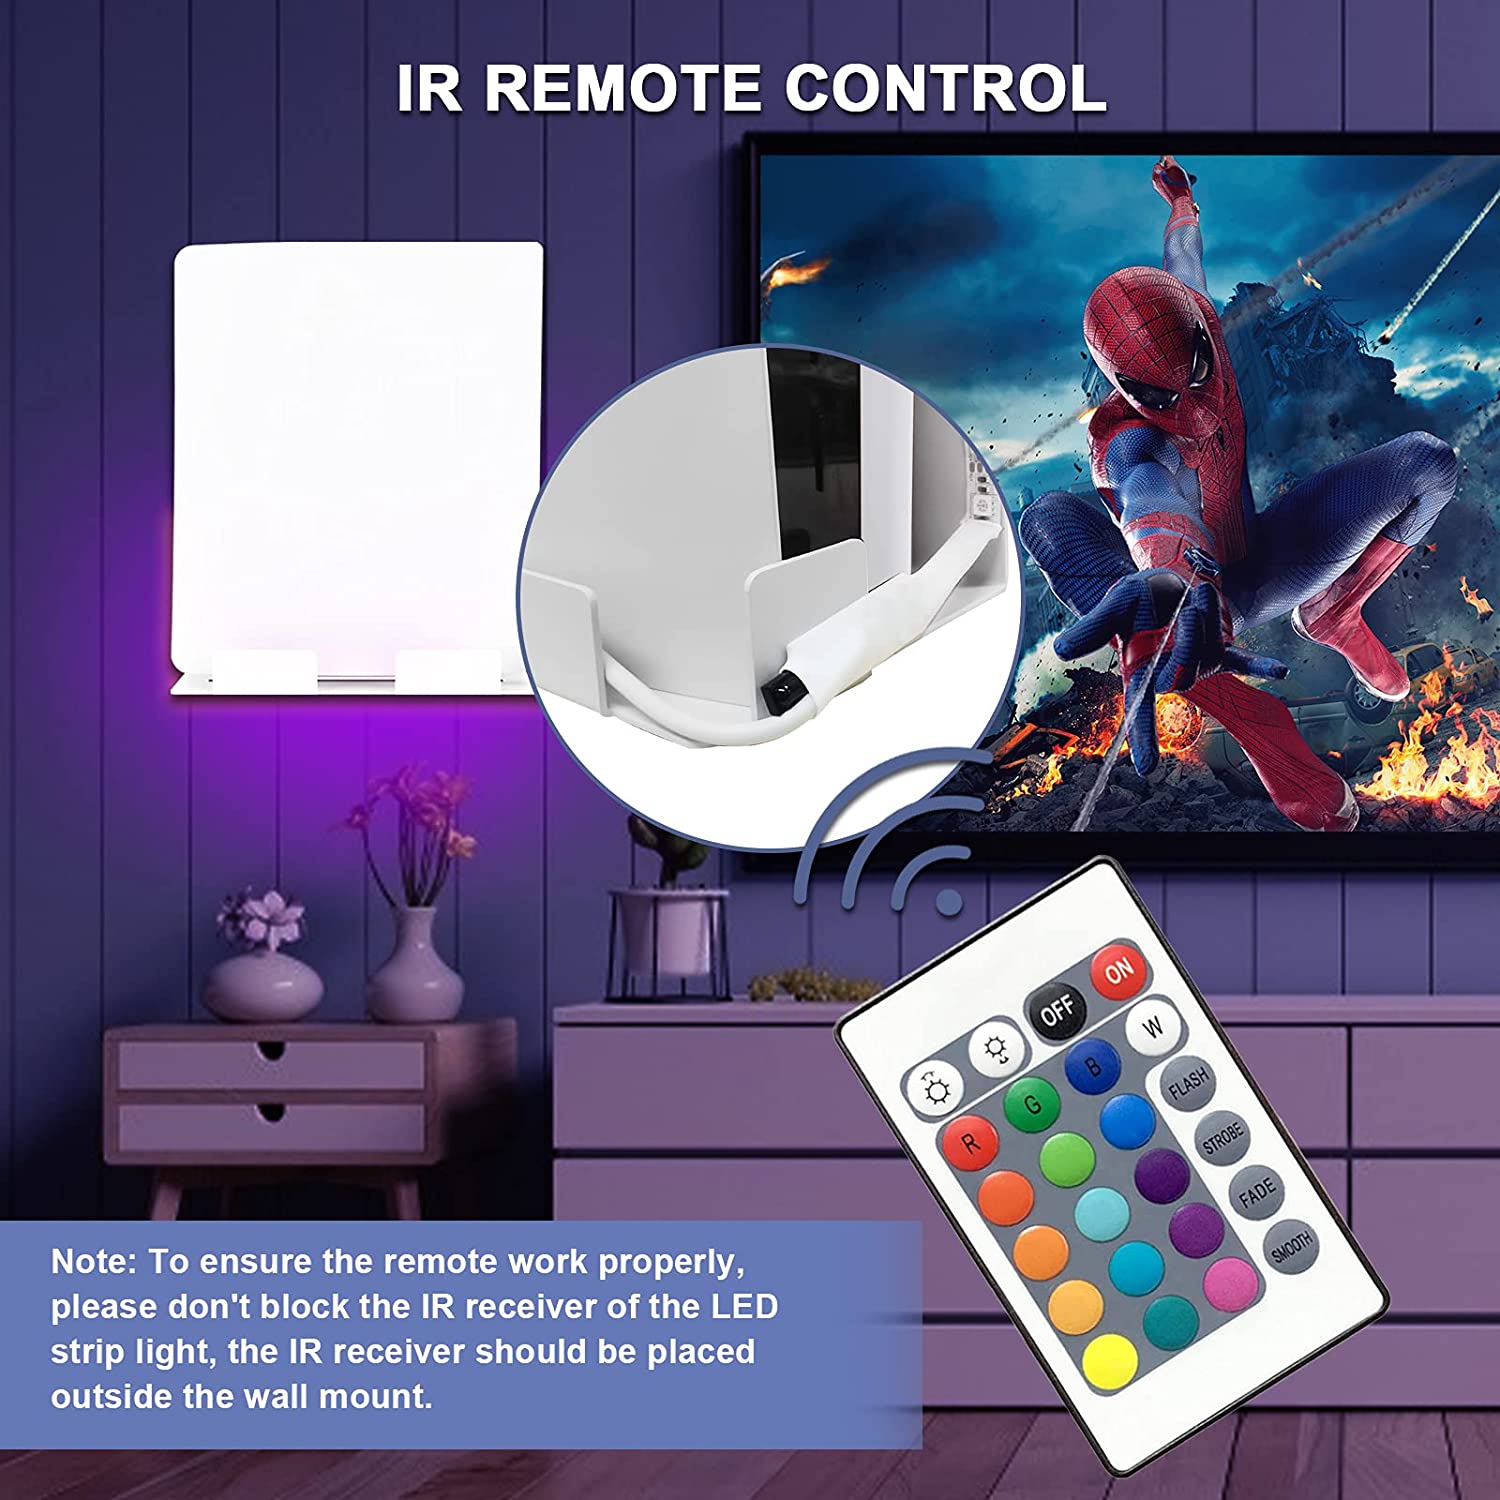 Easily adjust color and dynamic display modes by aligning the receiver with the included IR remote.